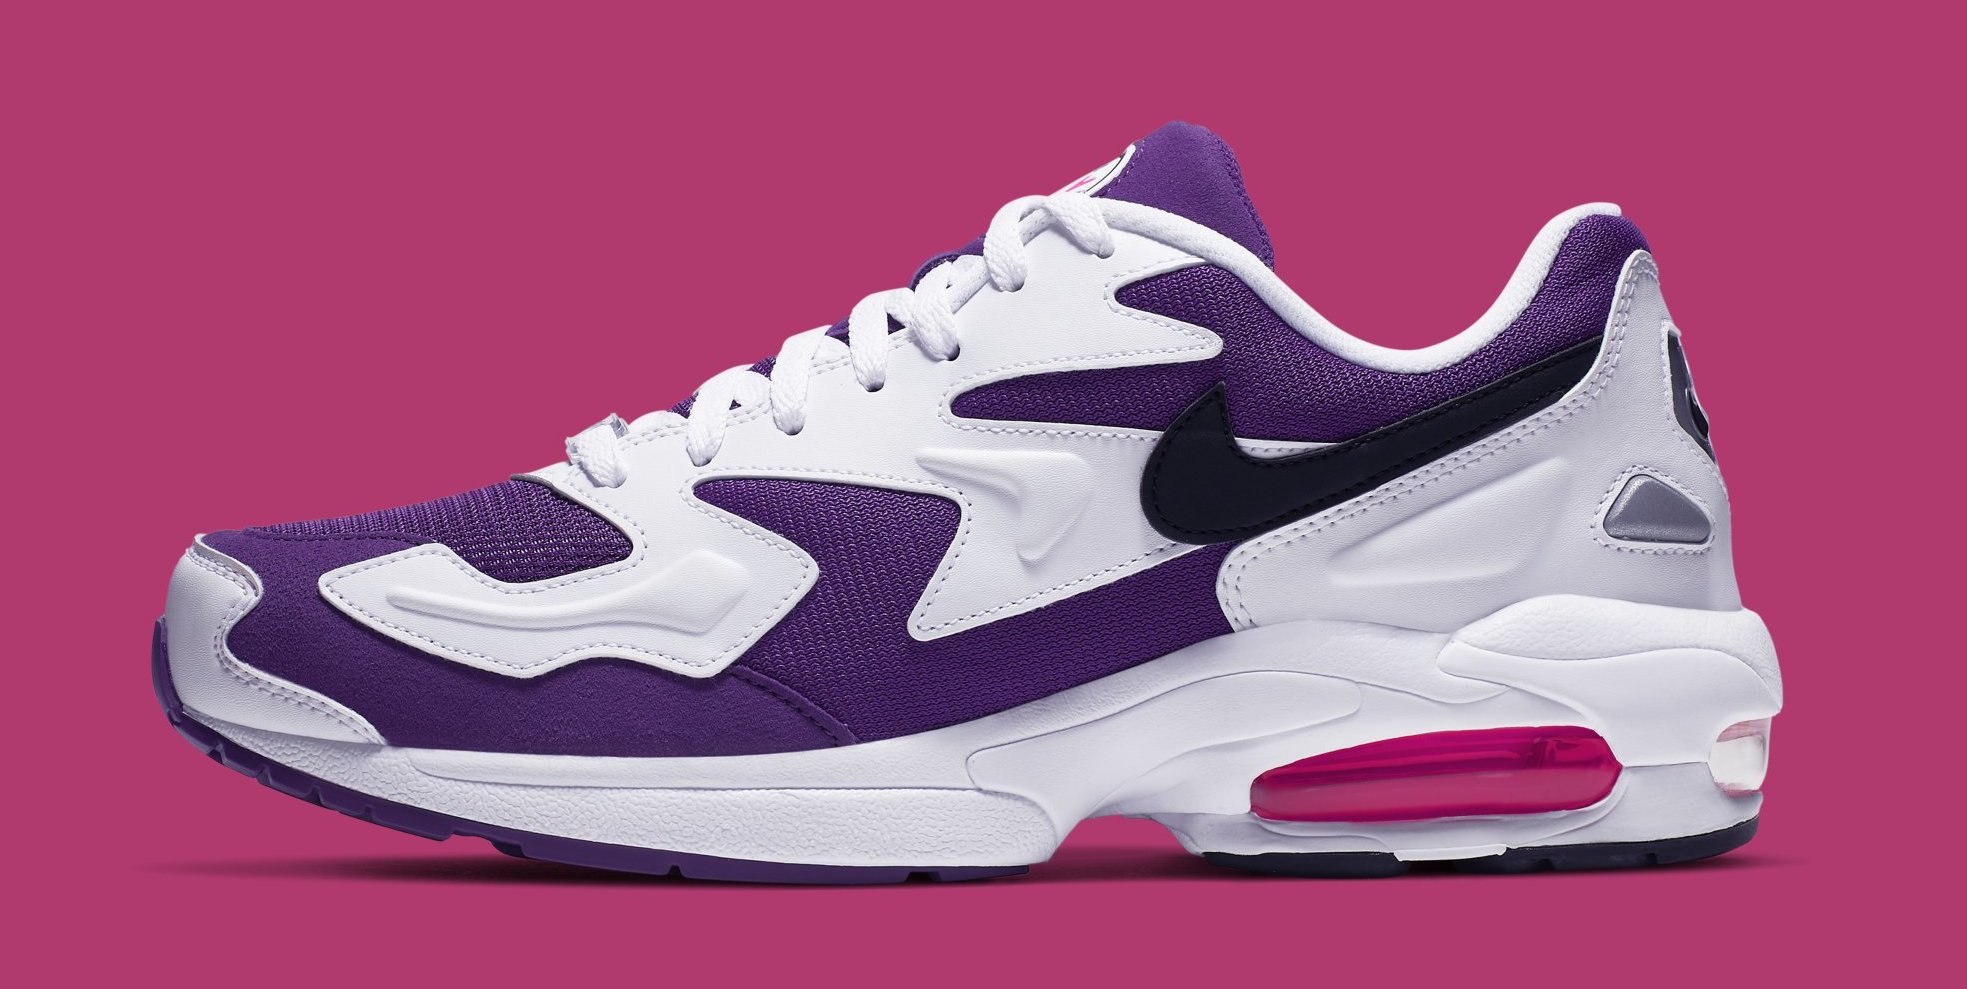 Nike Air Max2 Light &#x27;White/Court Purple Hyper Pink&#x27; AO1741 103 (Lateral)